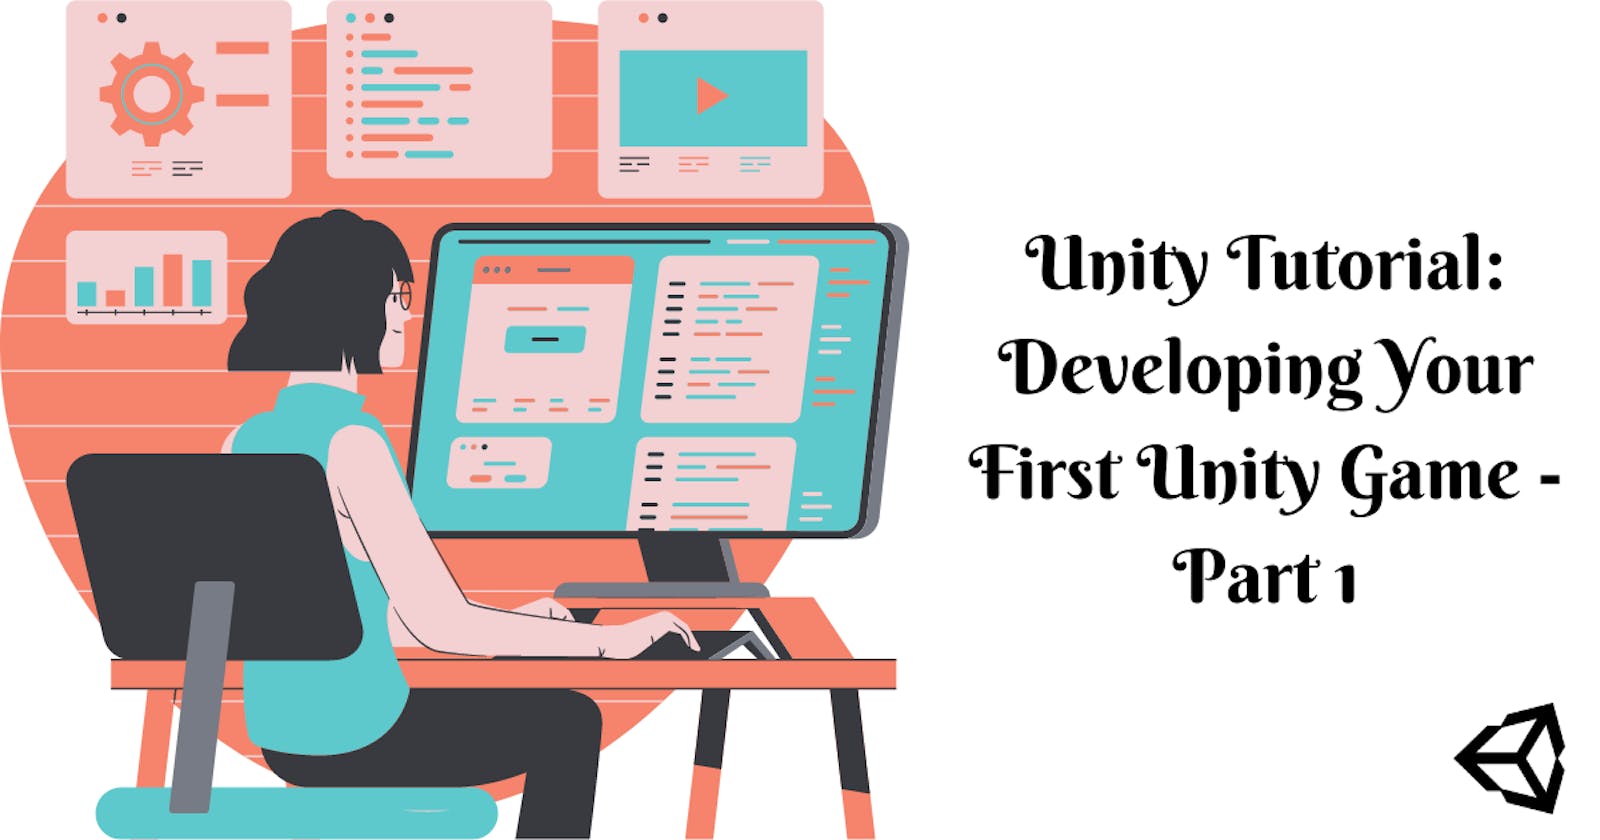 Unity Tutorial: Developing Your First Unity Game - Part 1